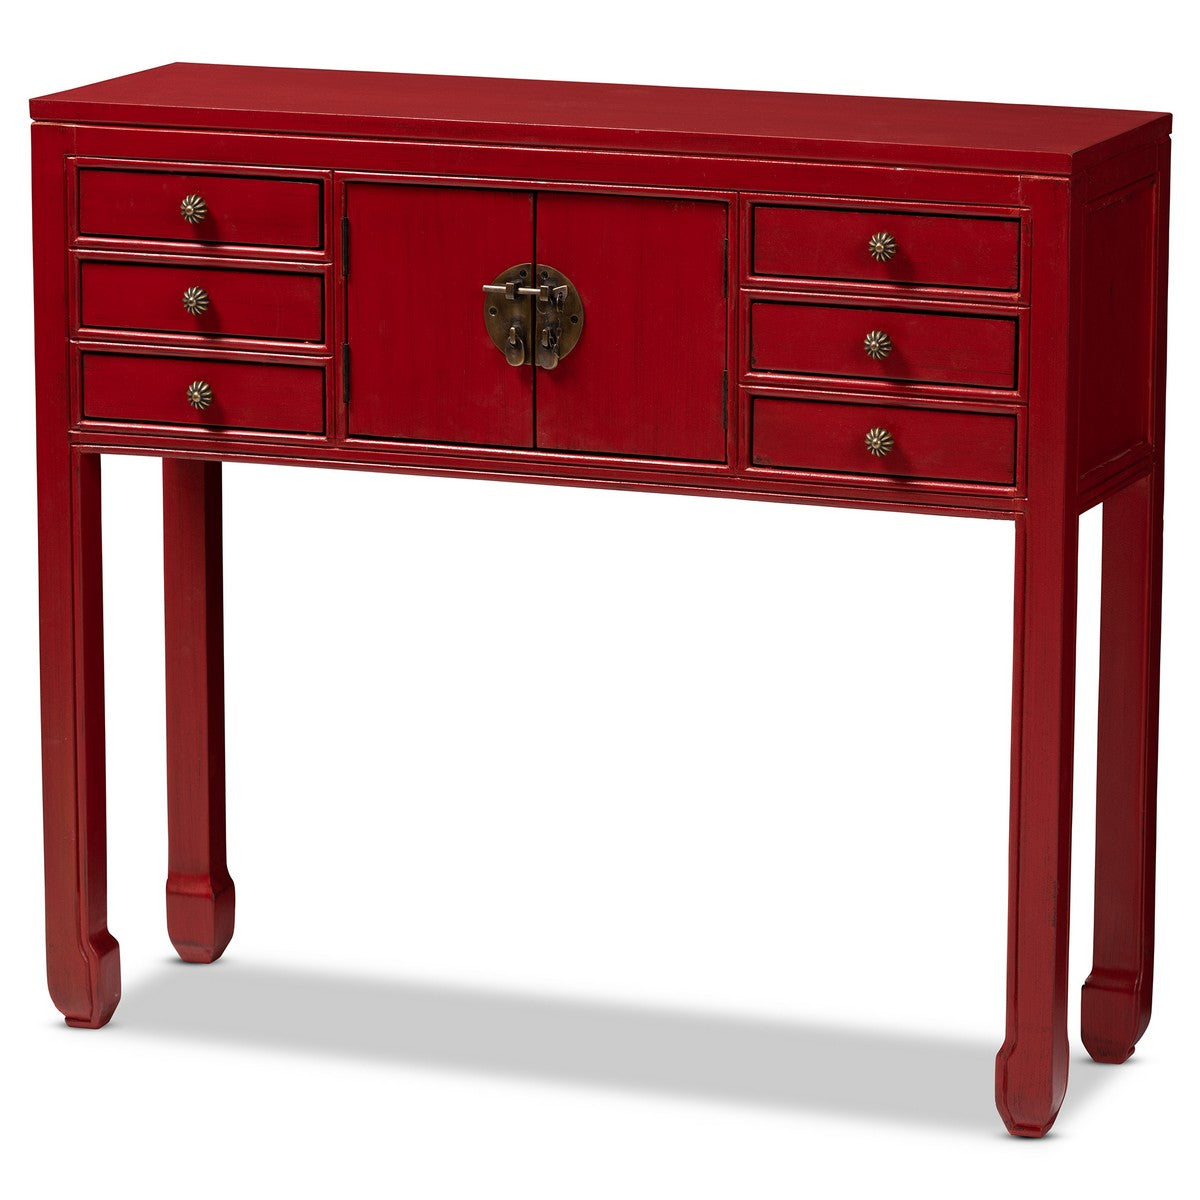 Baxton Studio Melodie Classic and Antique Red Finished Wood Bronze Finished Accents 6-Drawer Console Table Baxton Studio-side tables-Minimal And Modern - 1